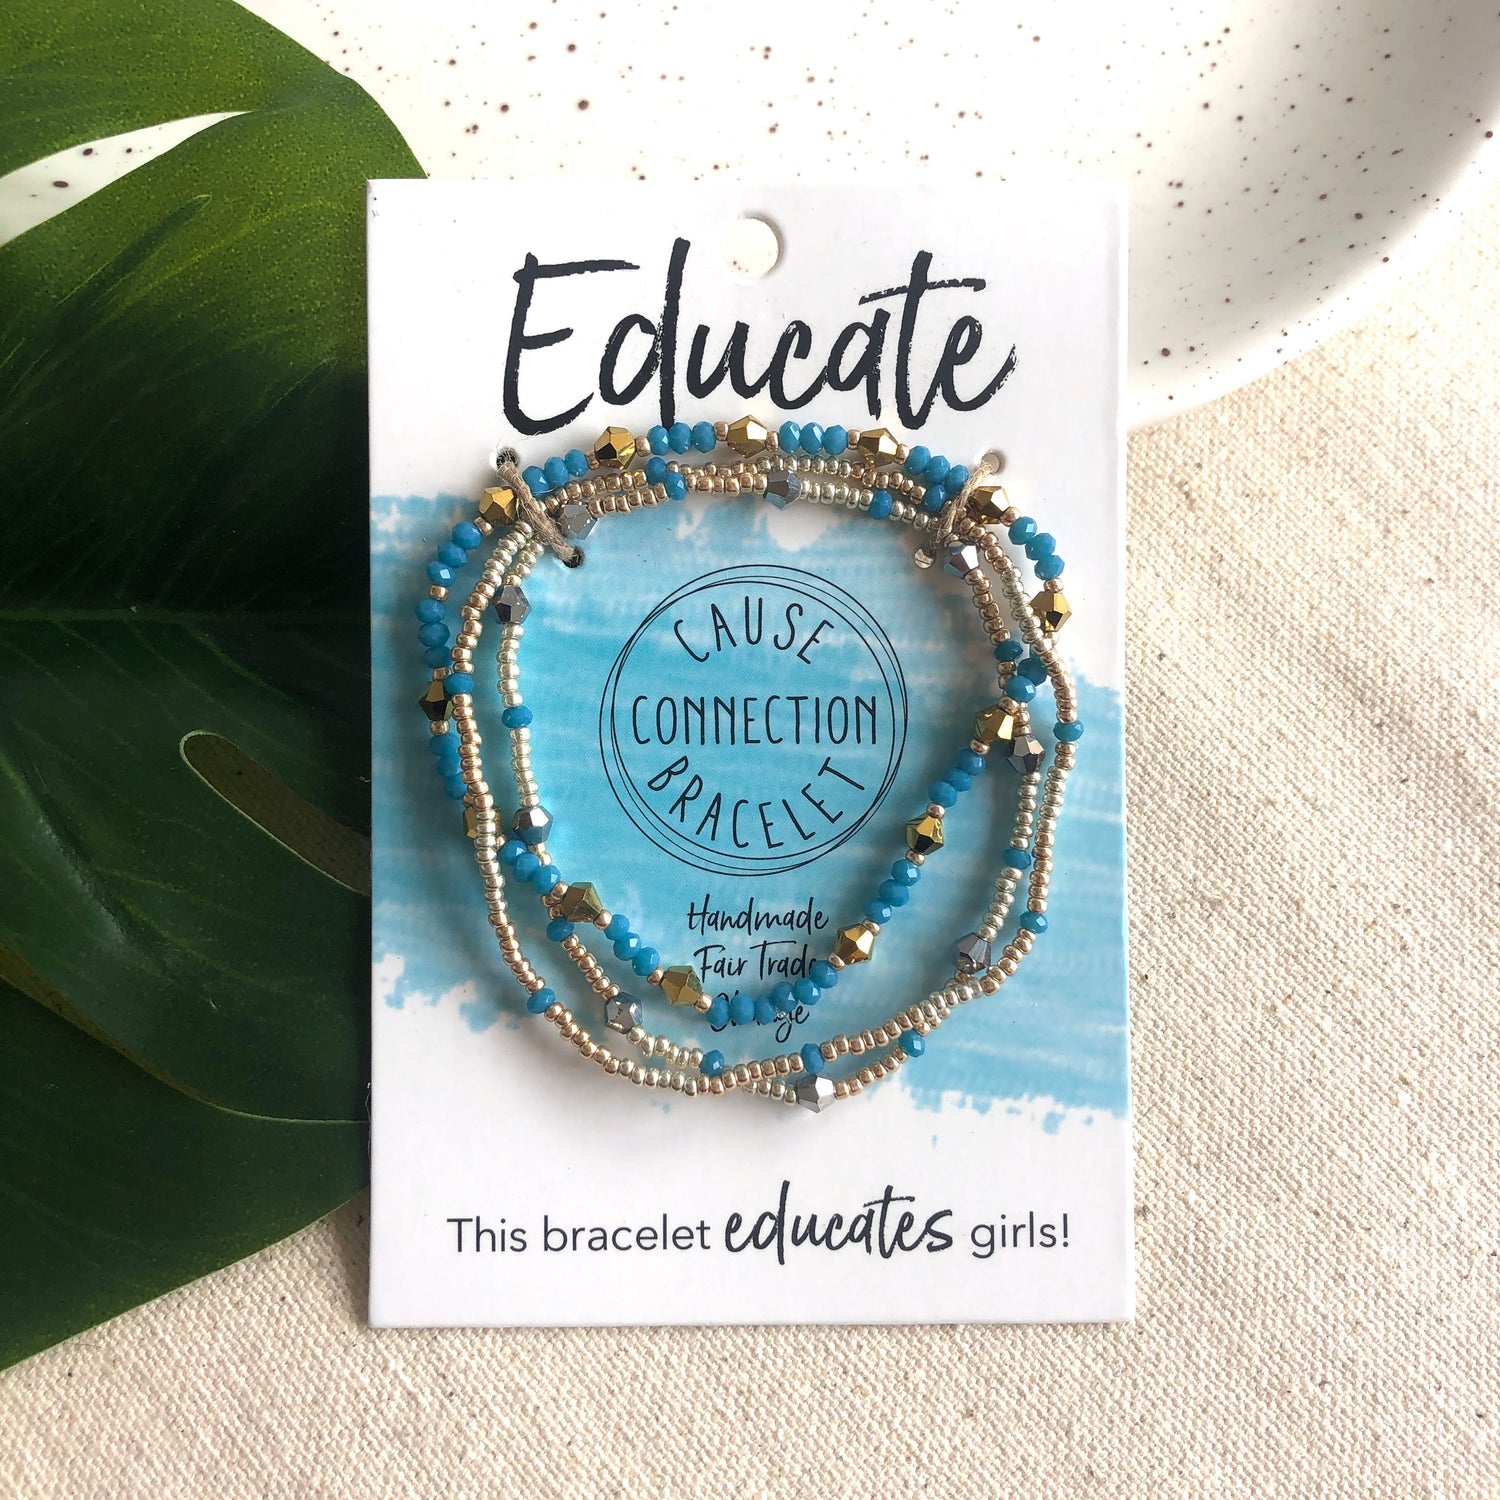 Image of the Cause Connection Bracelet, in the Educate theme.